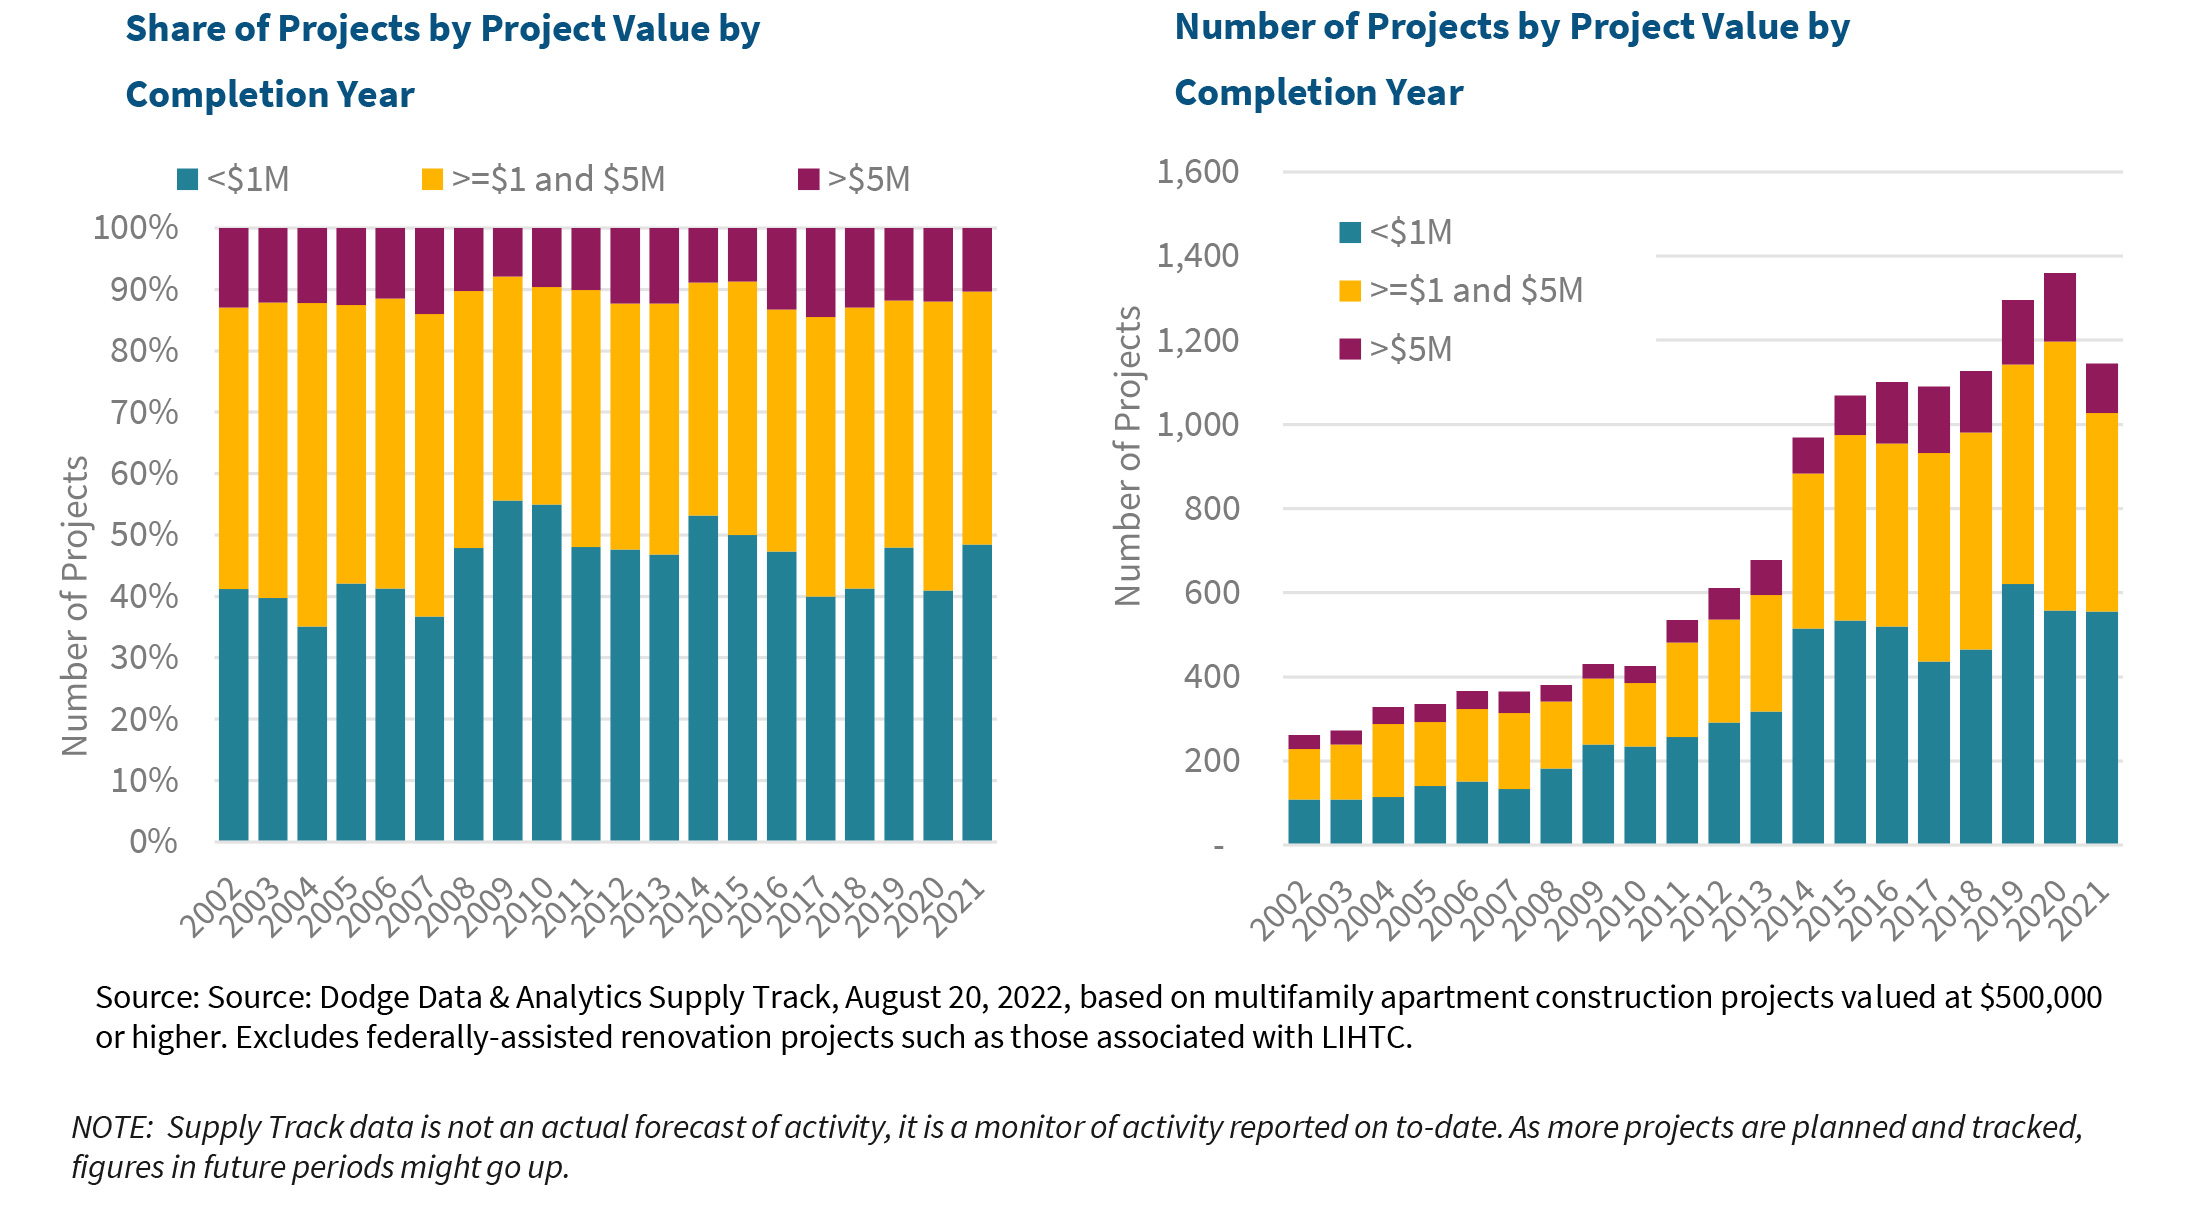 Share of Projects by Project Value by Completion Year | Number of Projects by Project Value by Completion Year